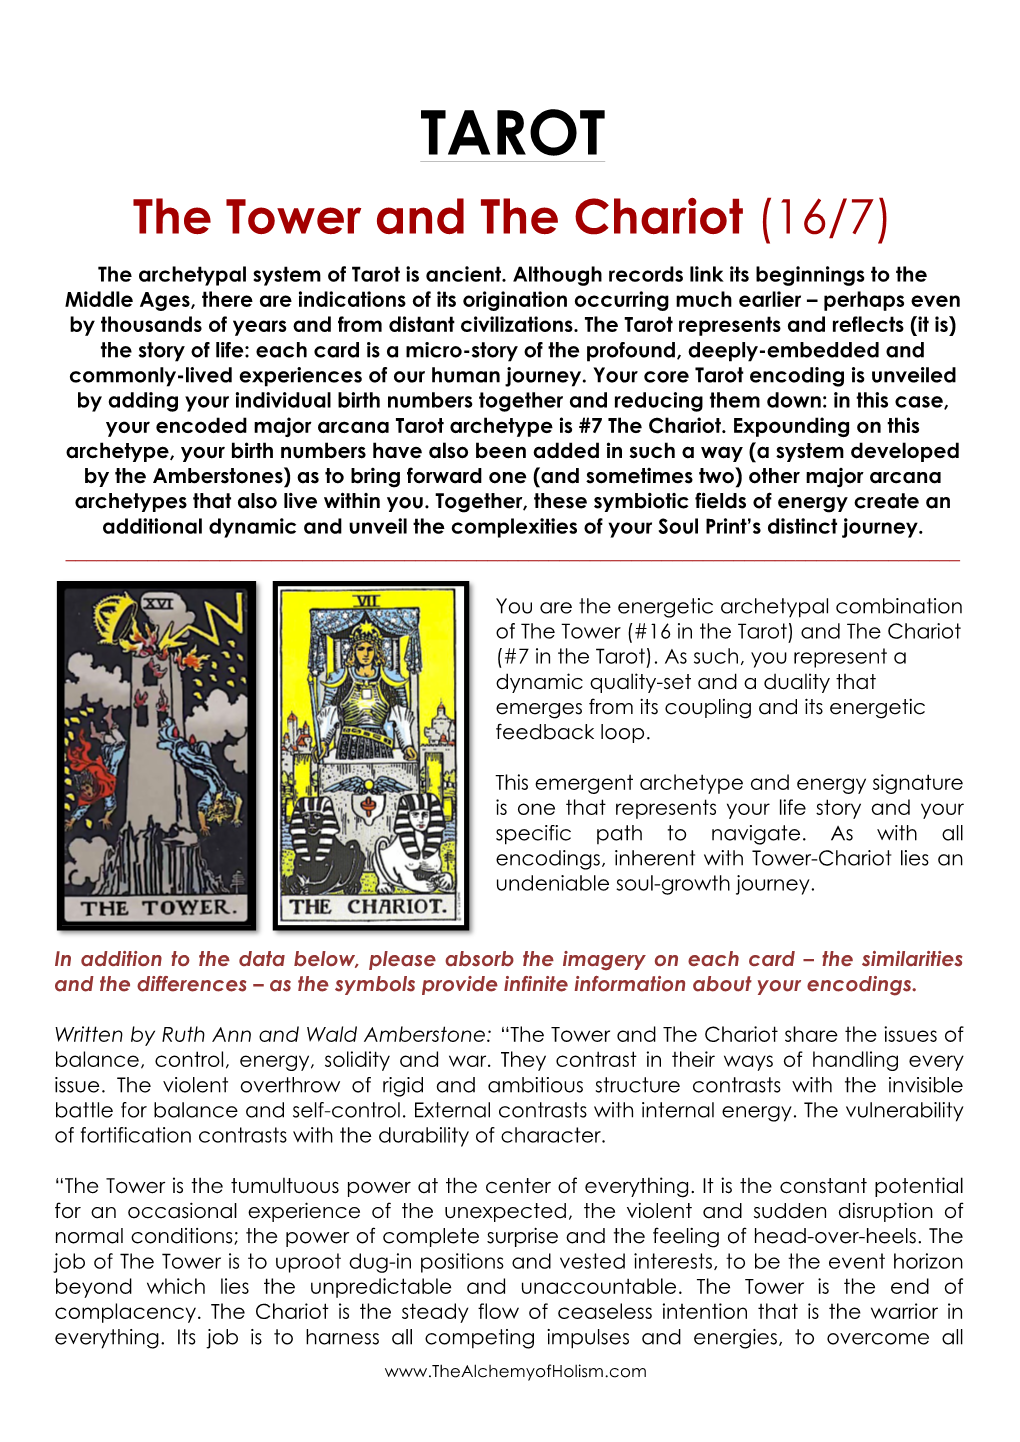 TAROT the Tower and the Chariot